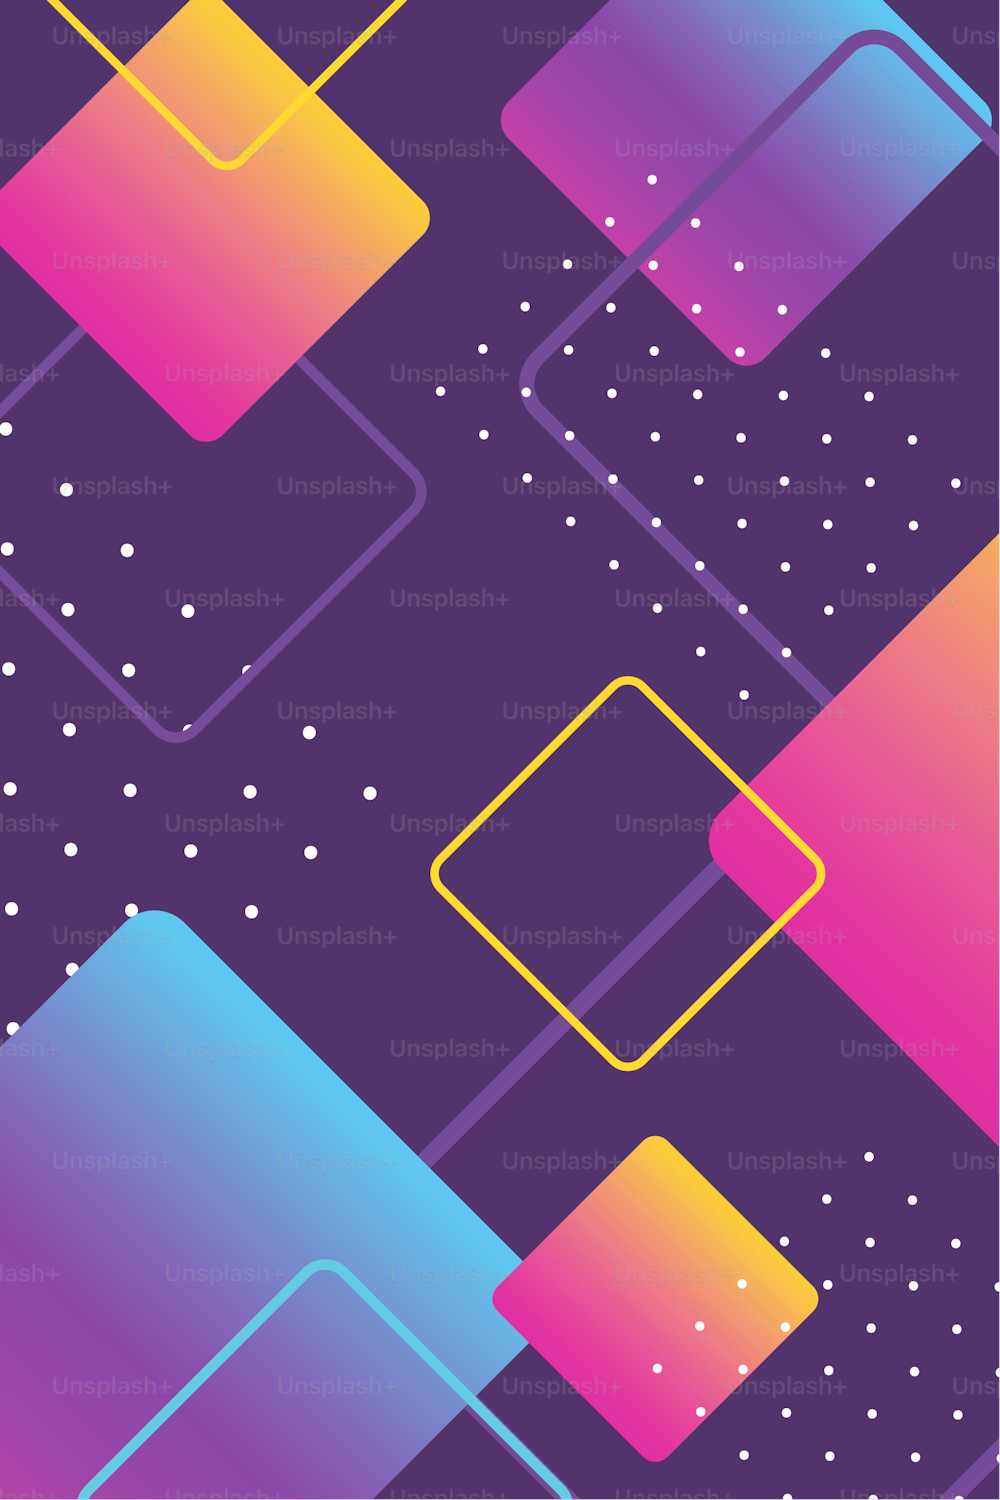 trendy 80s 90s style abstract geometric shape for brochure cover vector illustration